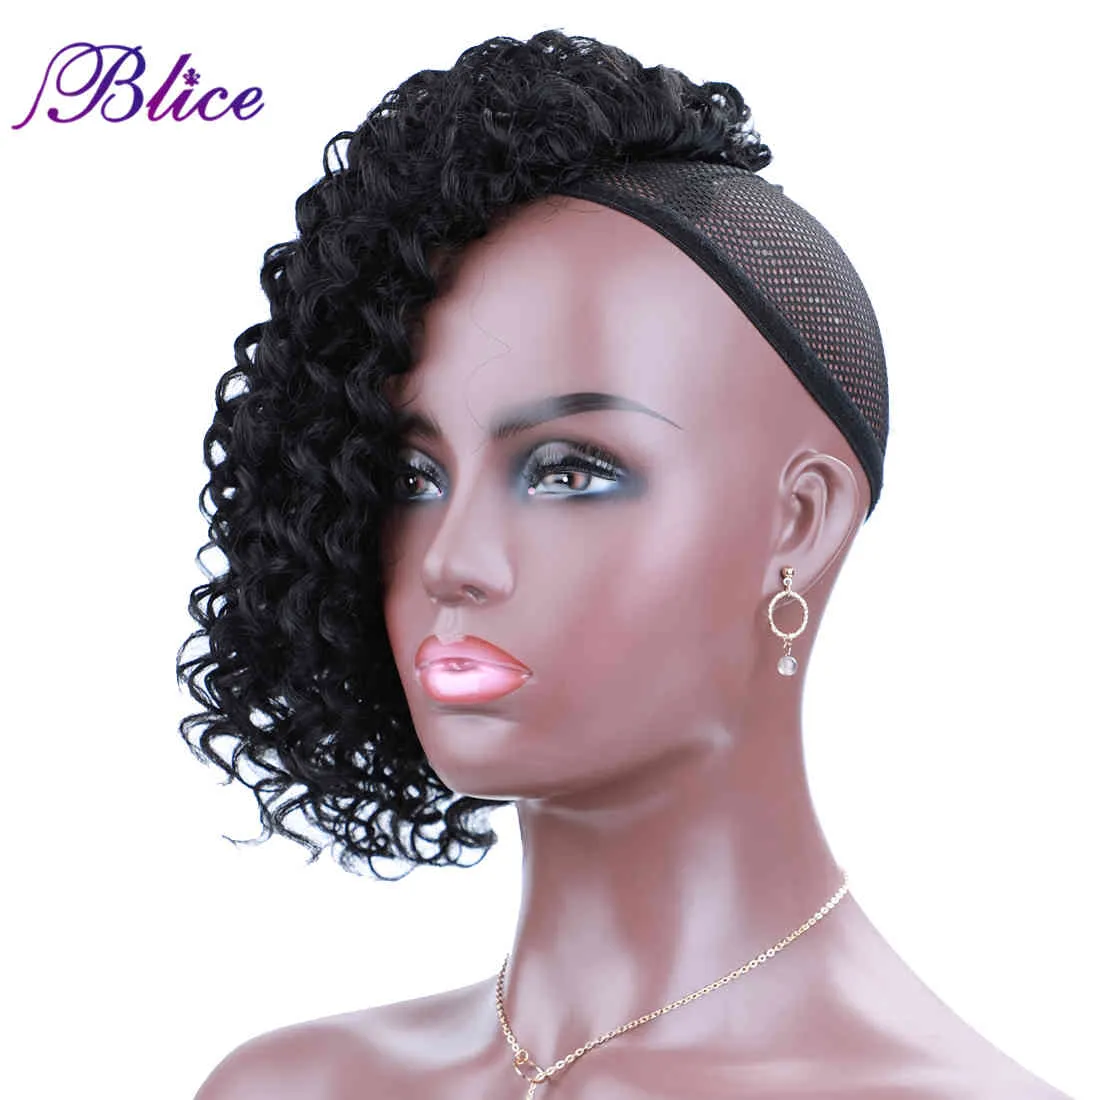 Blice Synthetic Bangs With Clips Side Part Bouncy Curls Natural Bang Long Curly Hair Extension Pieces For Women